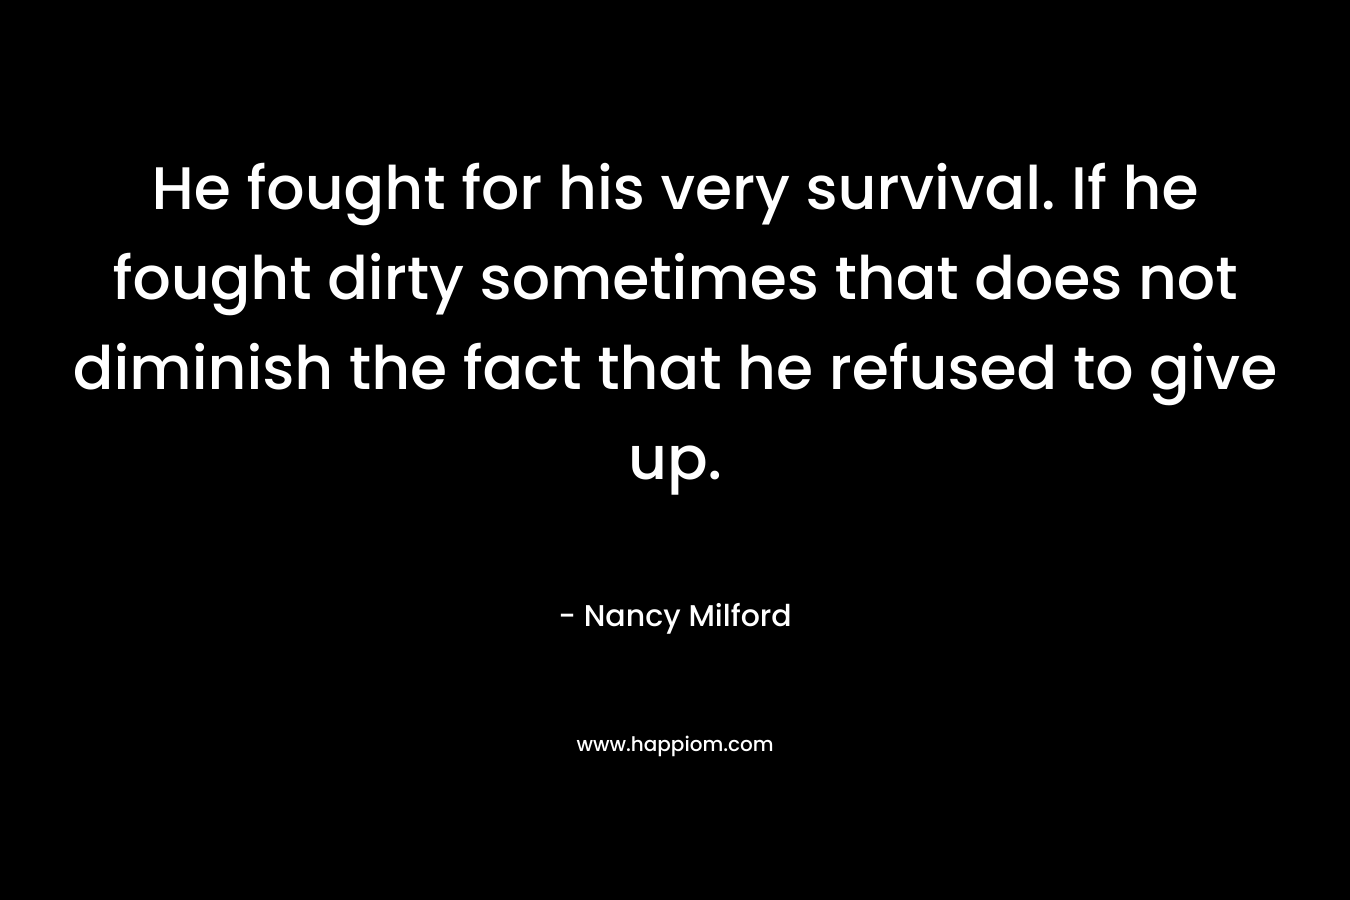 He fought for his very survival. If he fought dirty sometimes that does not diminish the fact that he refused to give up. – Nancy Milford